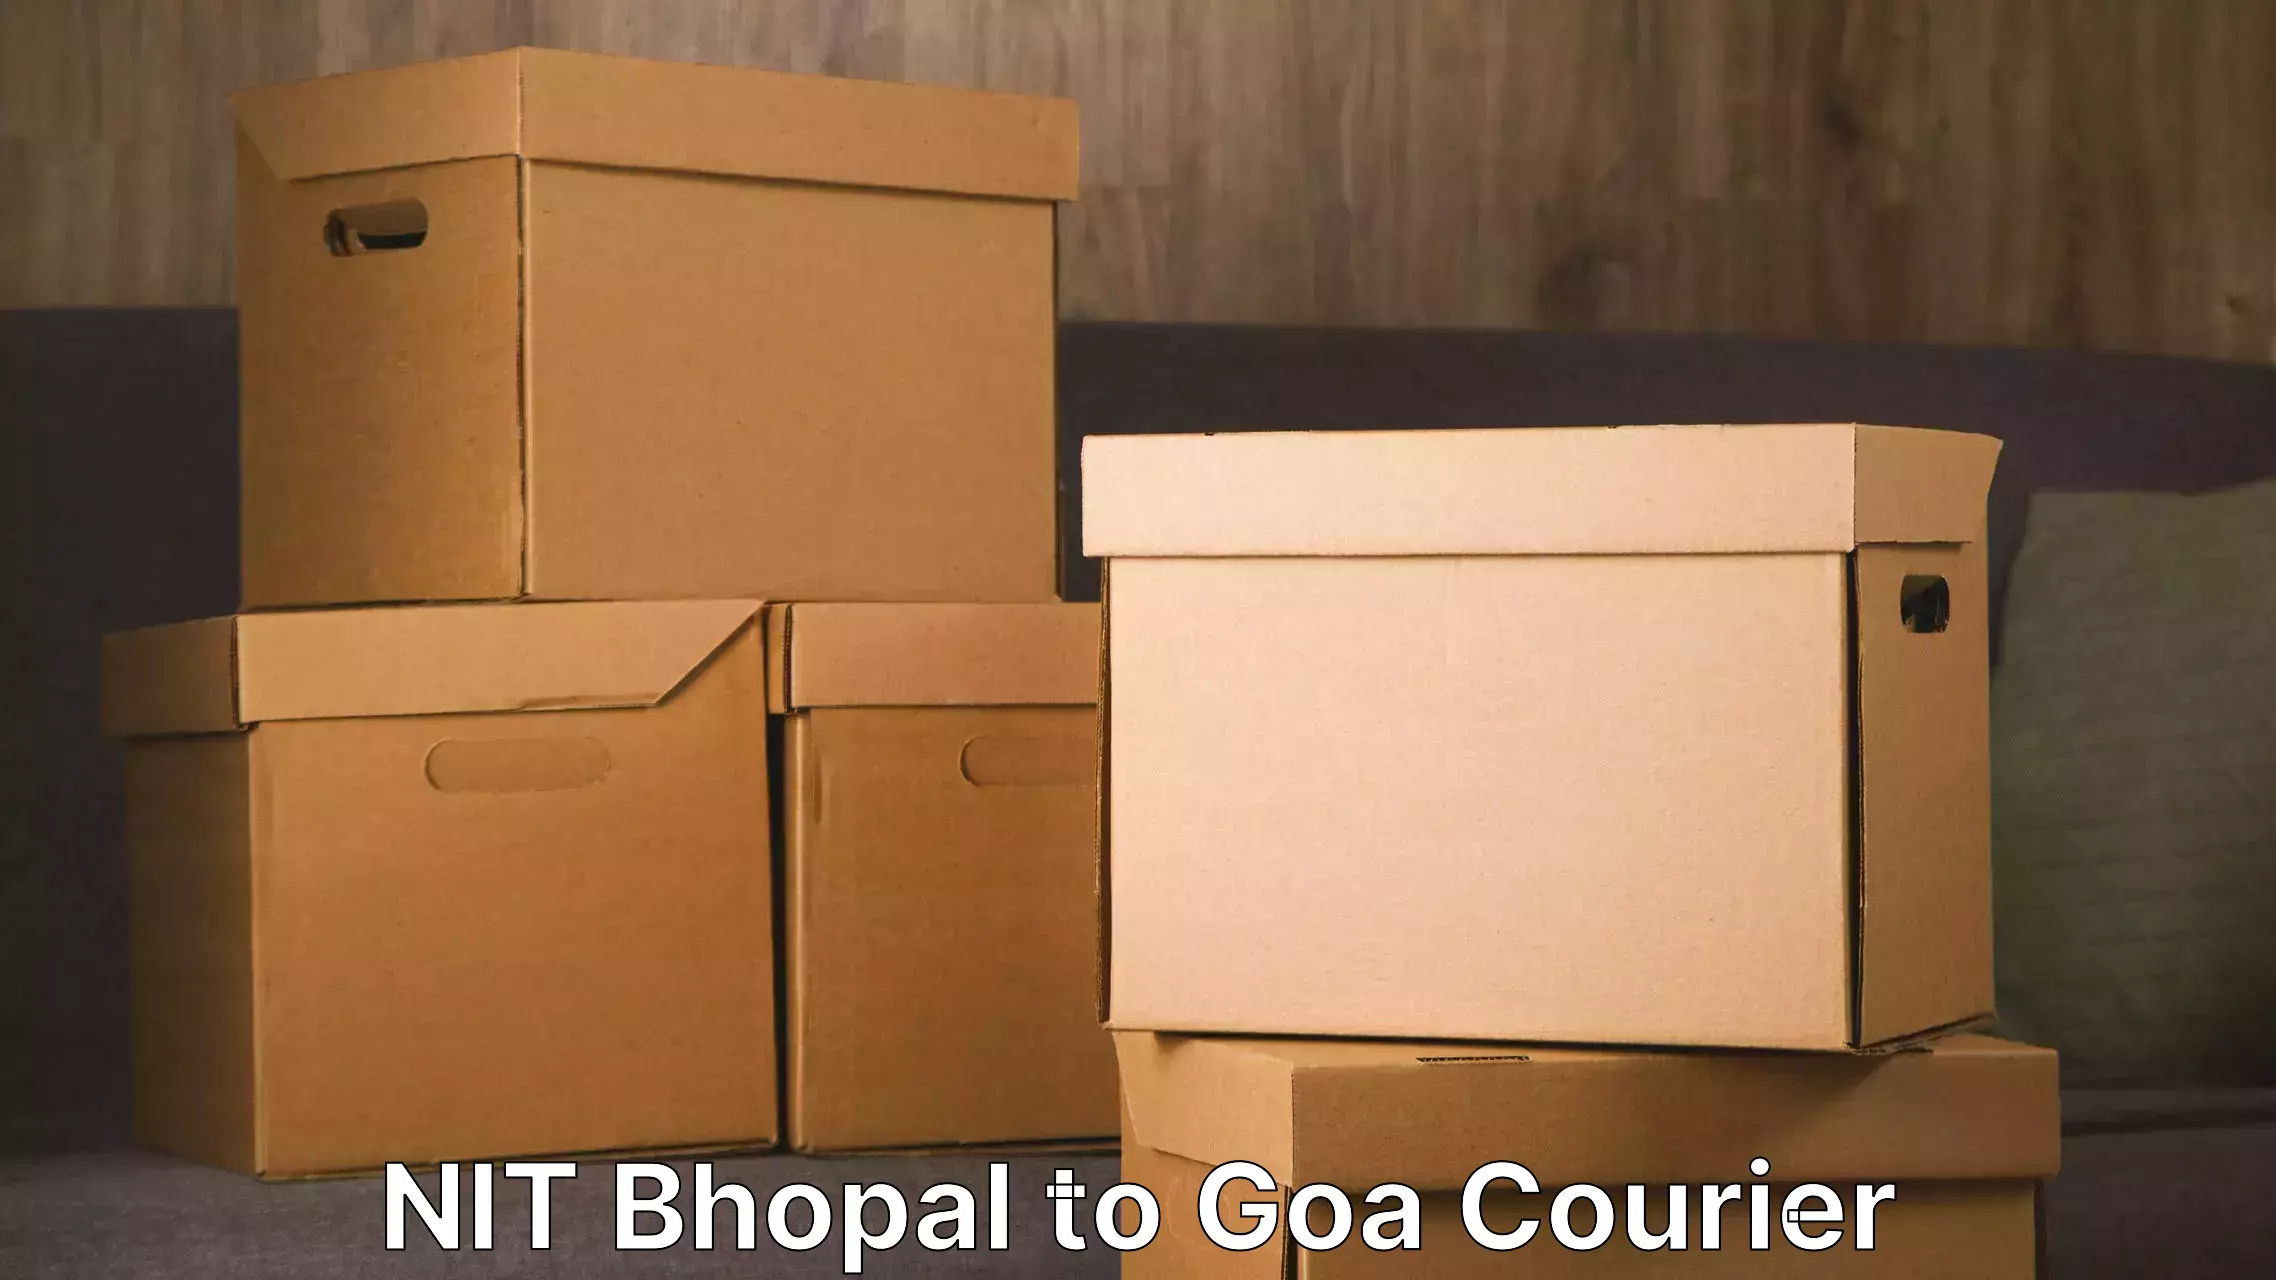 Hassle-free relocation in NIT Bhopal to IIT Goa